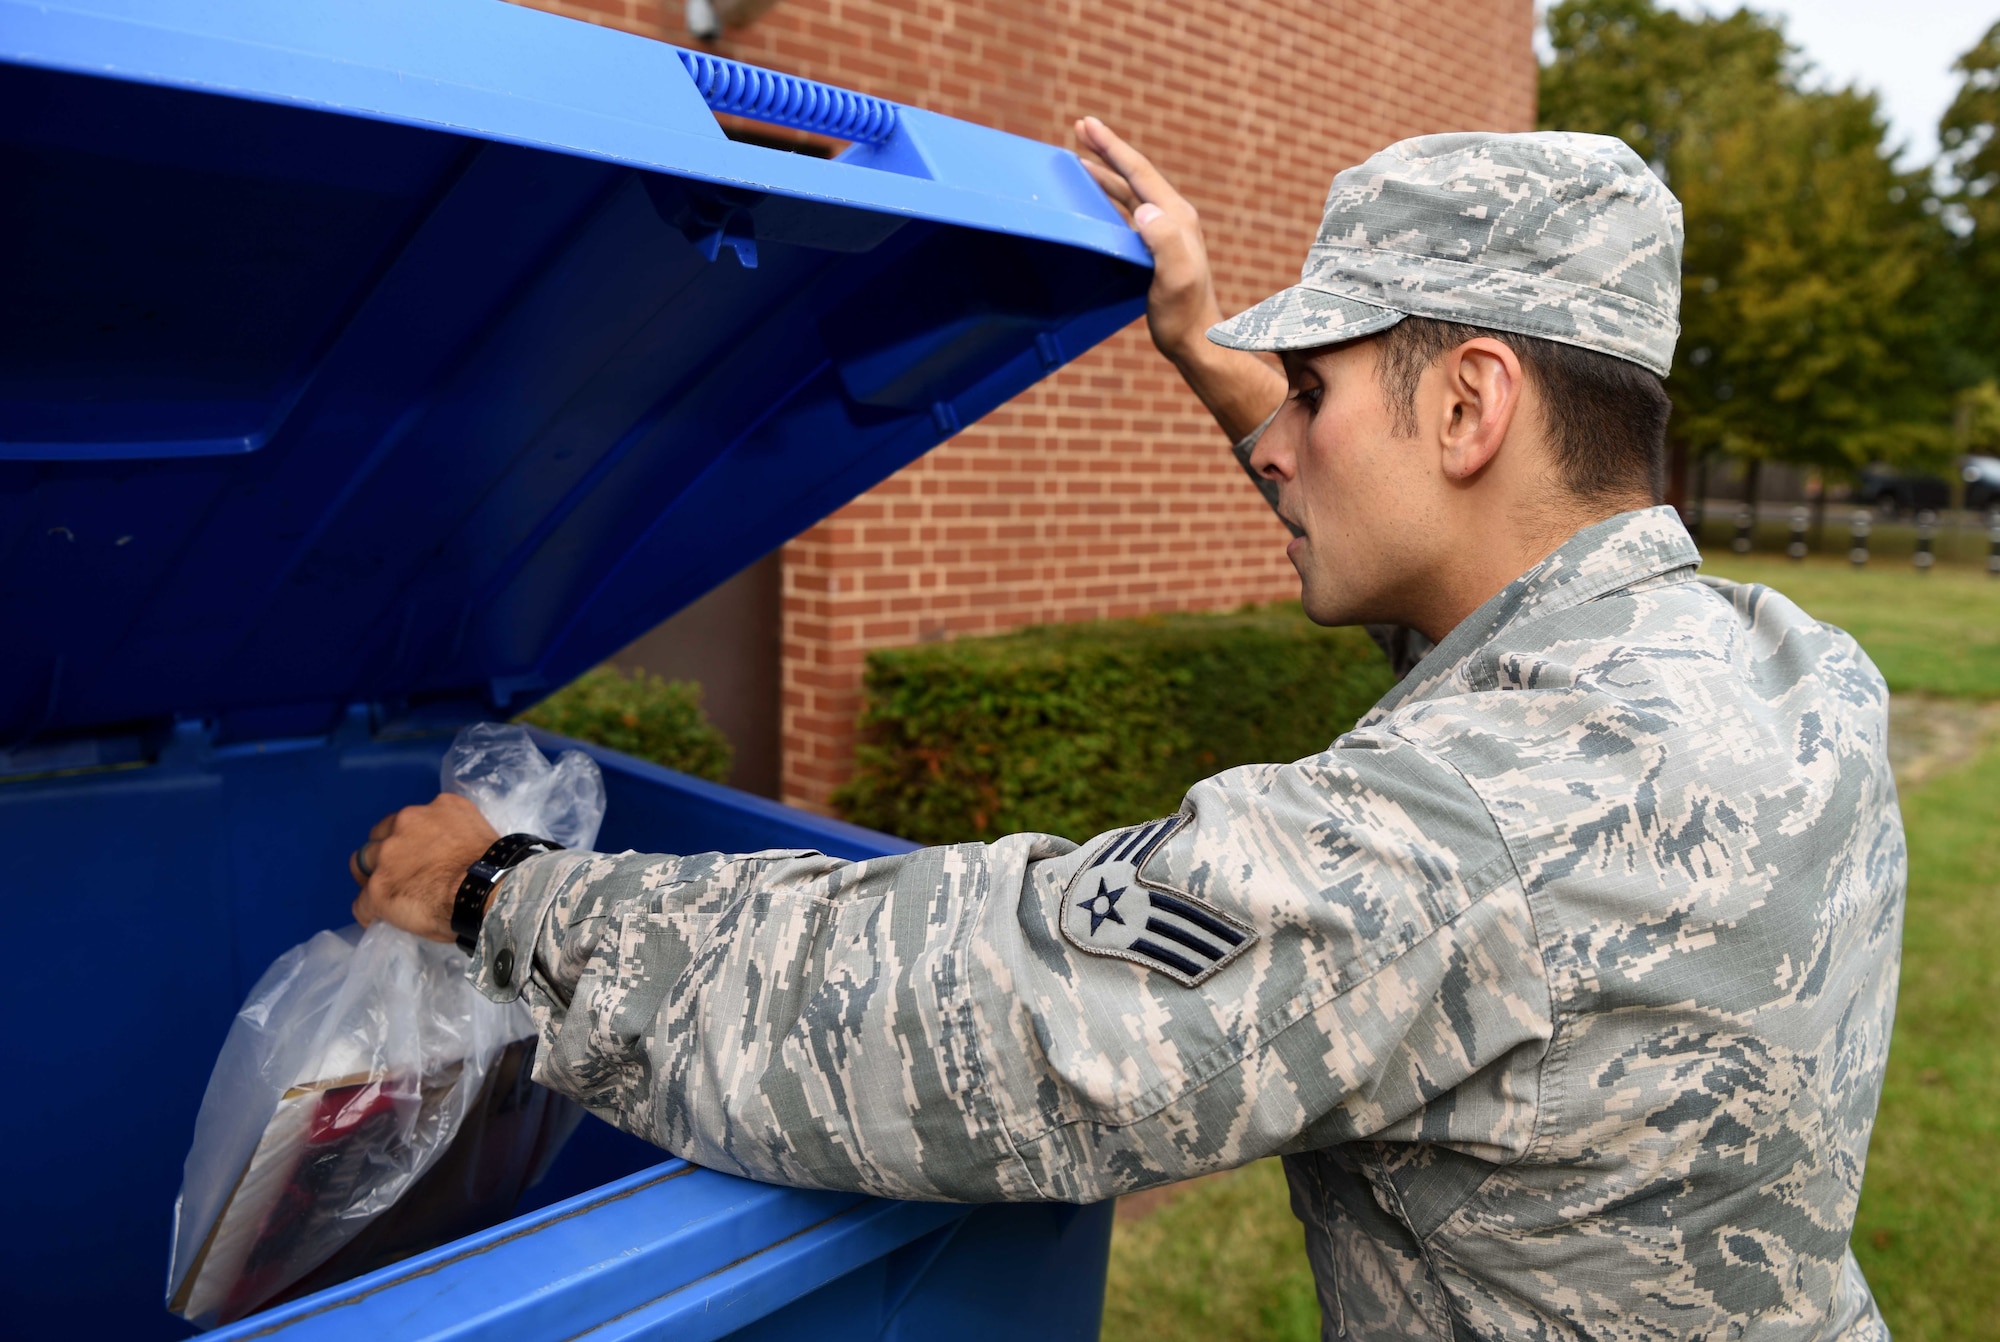 The Wright-Patterson Air Force Base Recycling center will continue outside collection containers as usual, but requests for pick-up will be evaluated with the goal of social distancing. (U.S. Air Force photo by Airman 1st Class Brandon Esau)